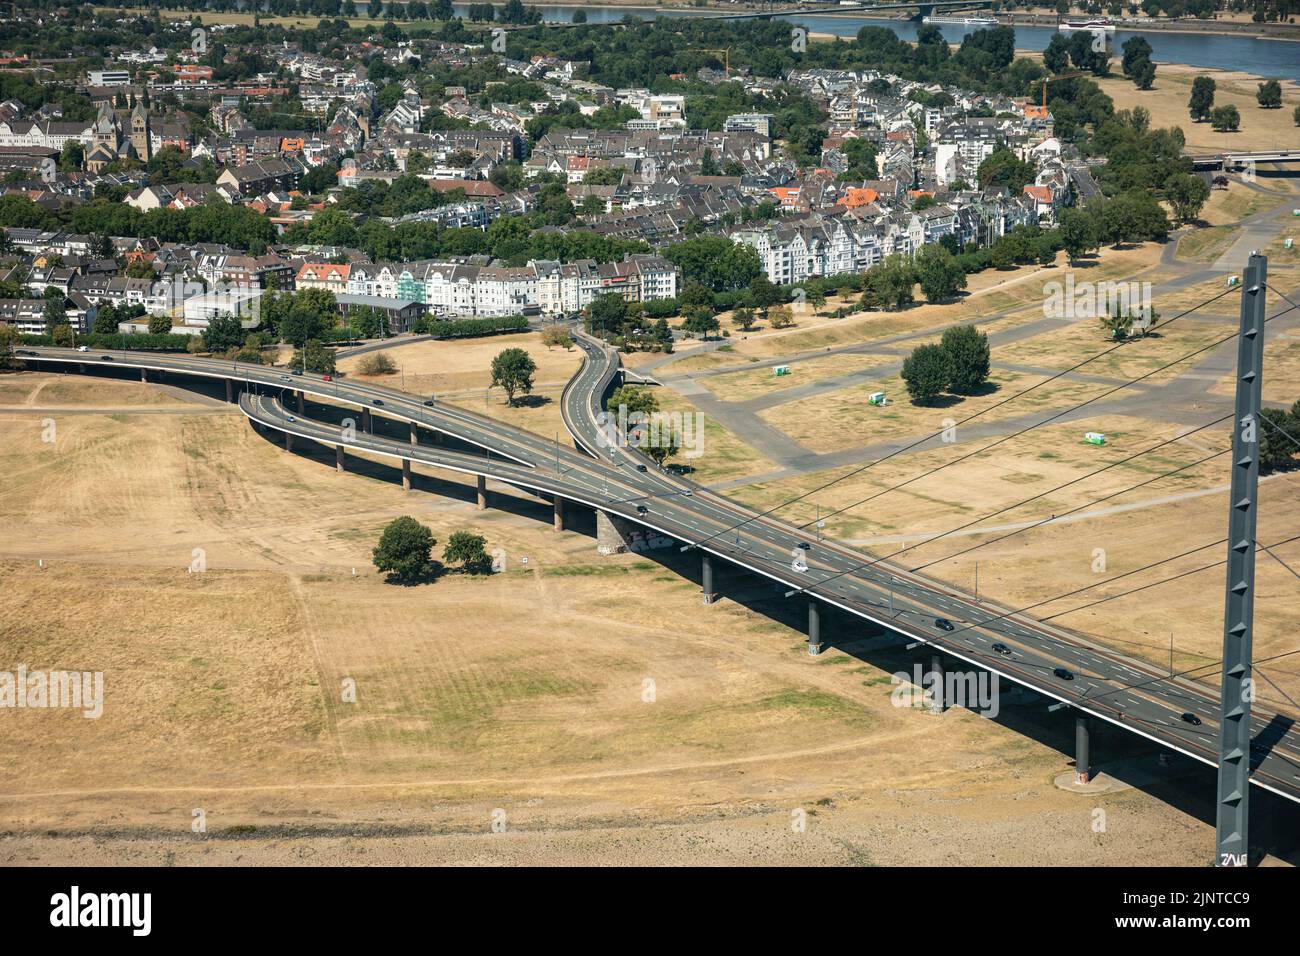 Düsseldorf, NRW, Germany, 13th Aug 2022. Unusually, much of the Rheinkniebrücke and its approach roads in the suburb of Oberkassel stand on dry, parched land at the moment. The River Rhine, one of the busiest inland waterways in the world, has been strongly affected by the ongoing drought and resulting low water levels, caused by prolonged heat of up to 40 degrees and very little rain in the last few weeks. The shipping lane has narrowed down considerably, slowing down traffic, most vessels have also had to considerably reduce their freight weight, leading to supply issues and higher shipping Stock Photo